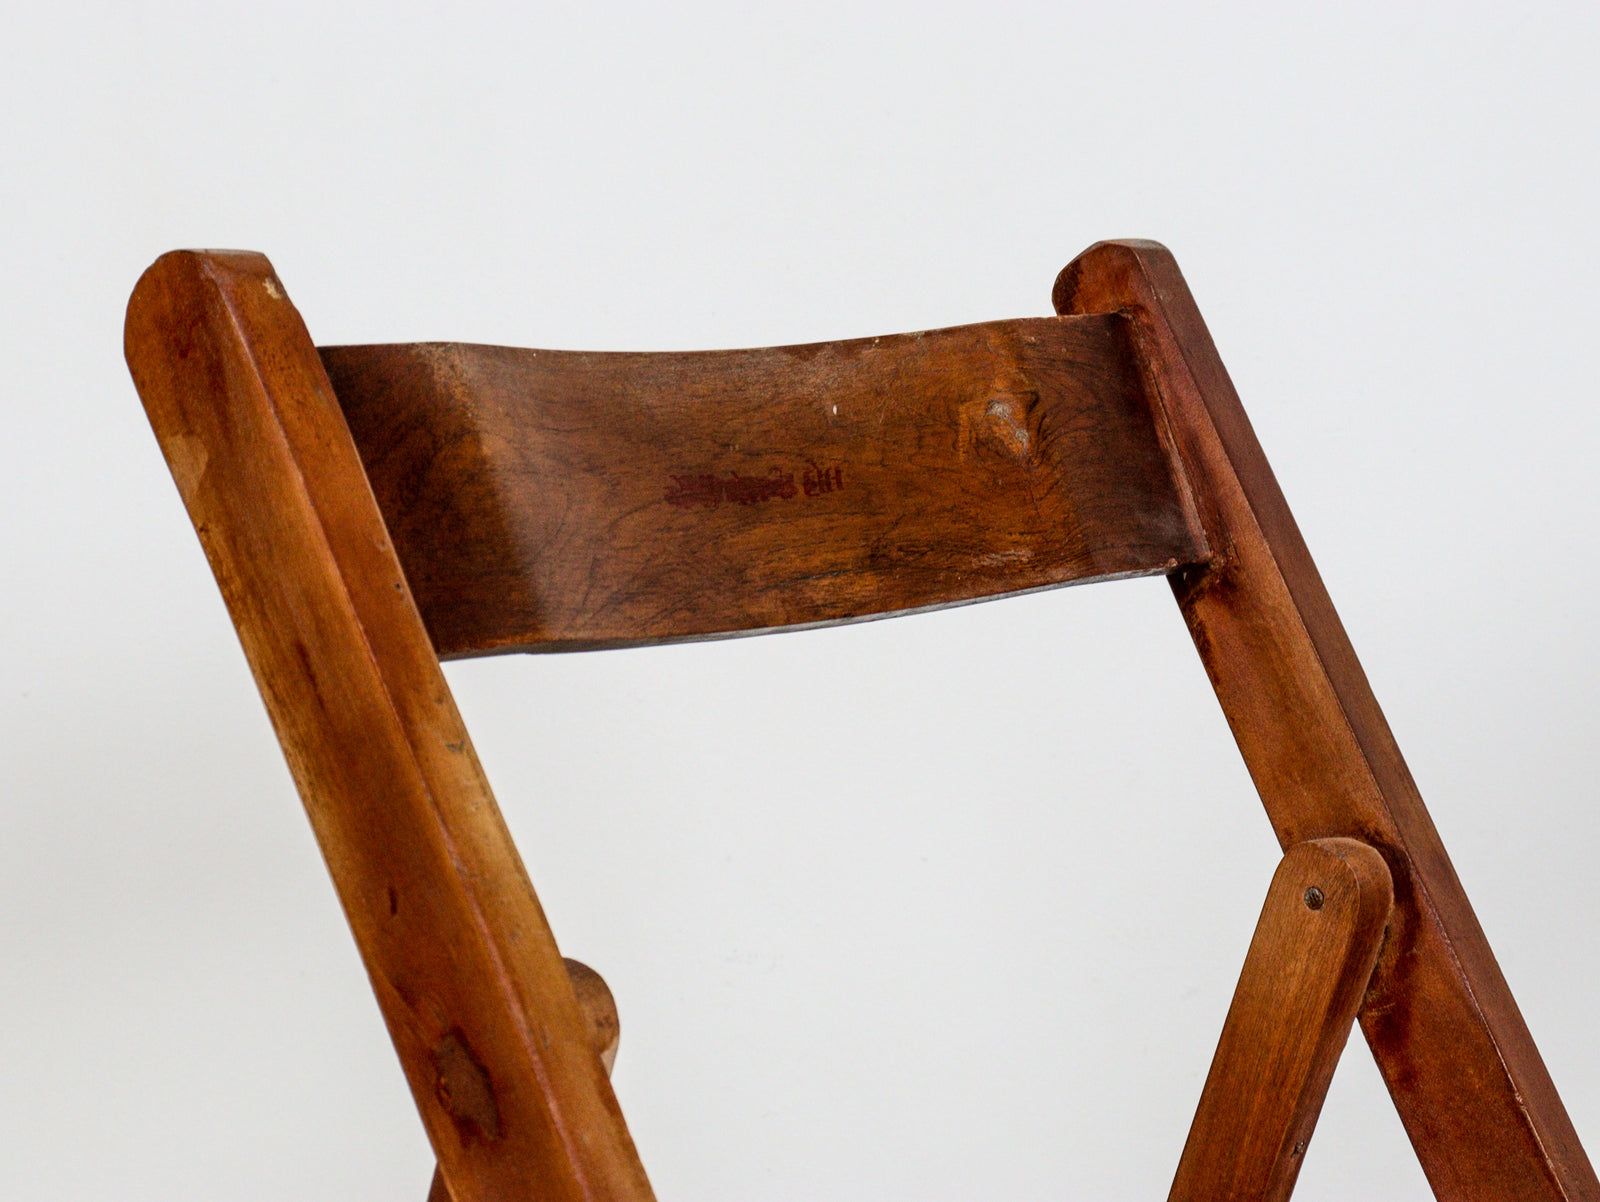 MILL-2049 Wooden Chair C27